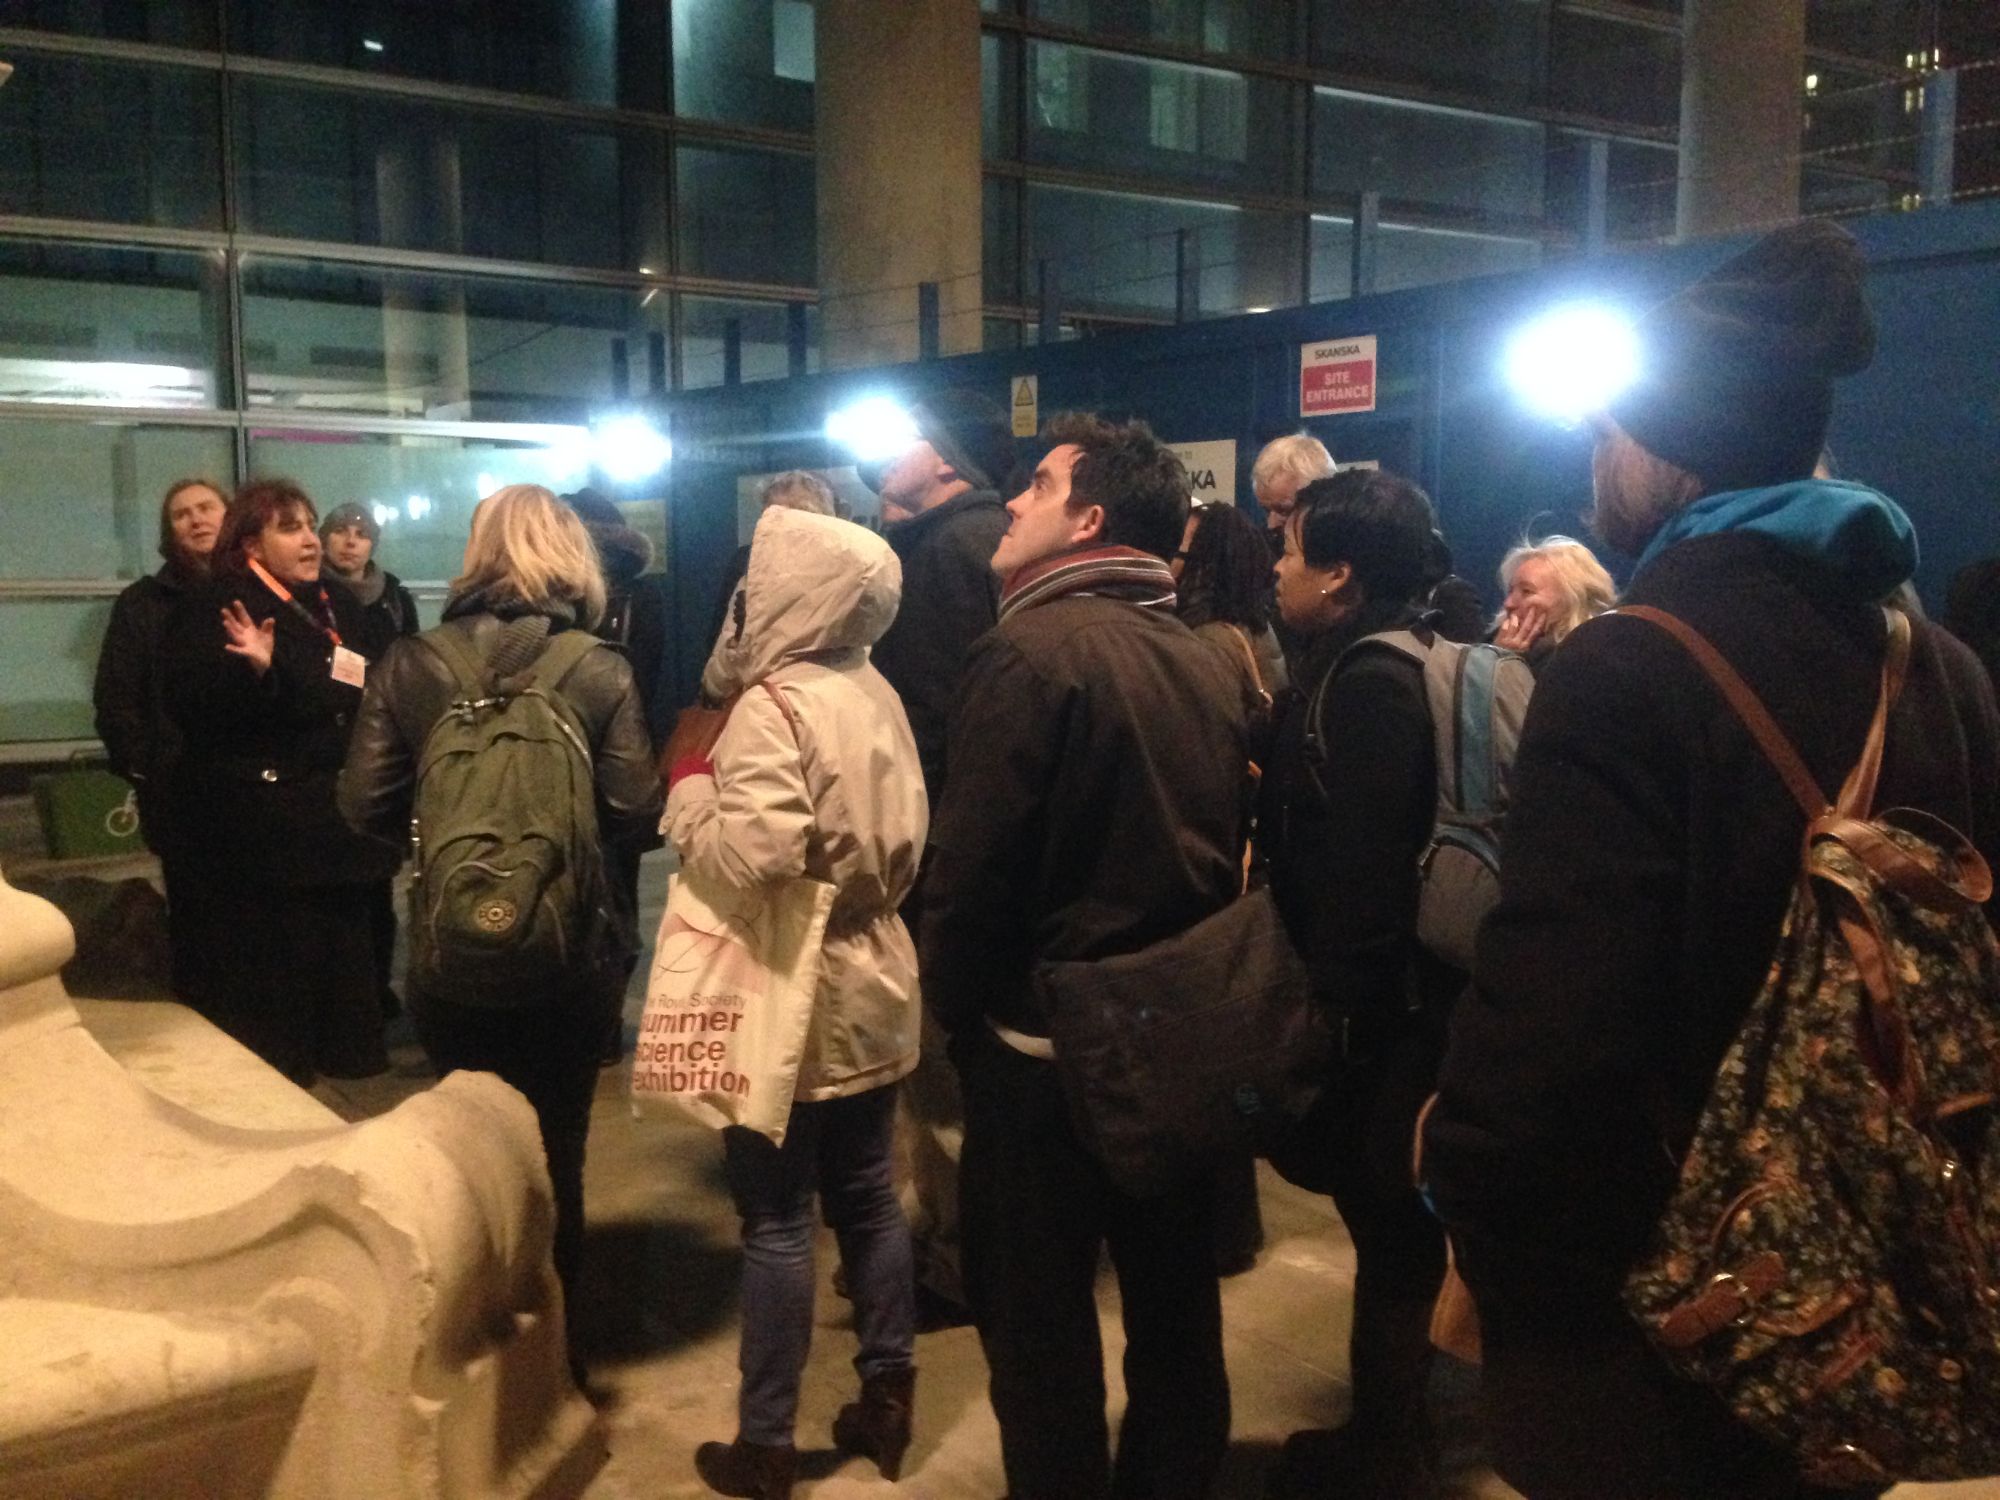 Photo of Tina leading a medical history tour  for Centre of the Cell.  The small group is standing at the base of a statue in the grounds of the London Hospital, Whitechapel. In the background is some temporary boarding, as there was building work taking place . The tour took place in the evening, so it is dark and the street lamps are lit.